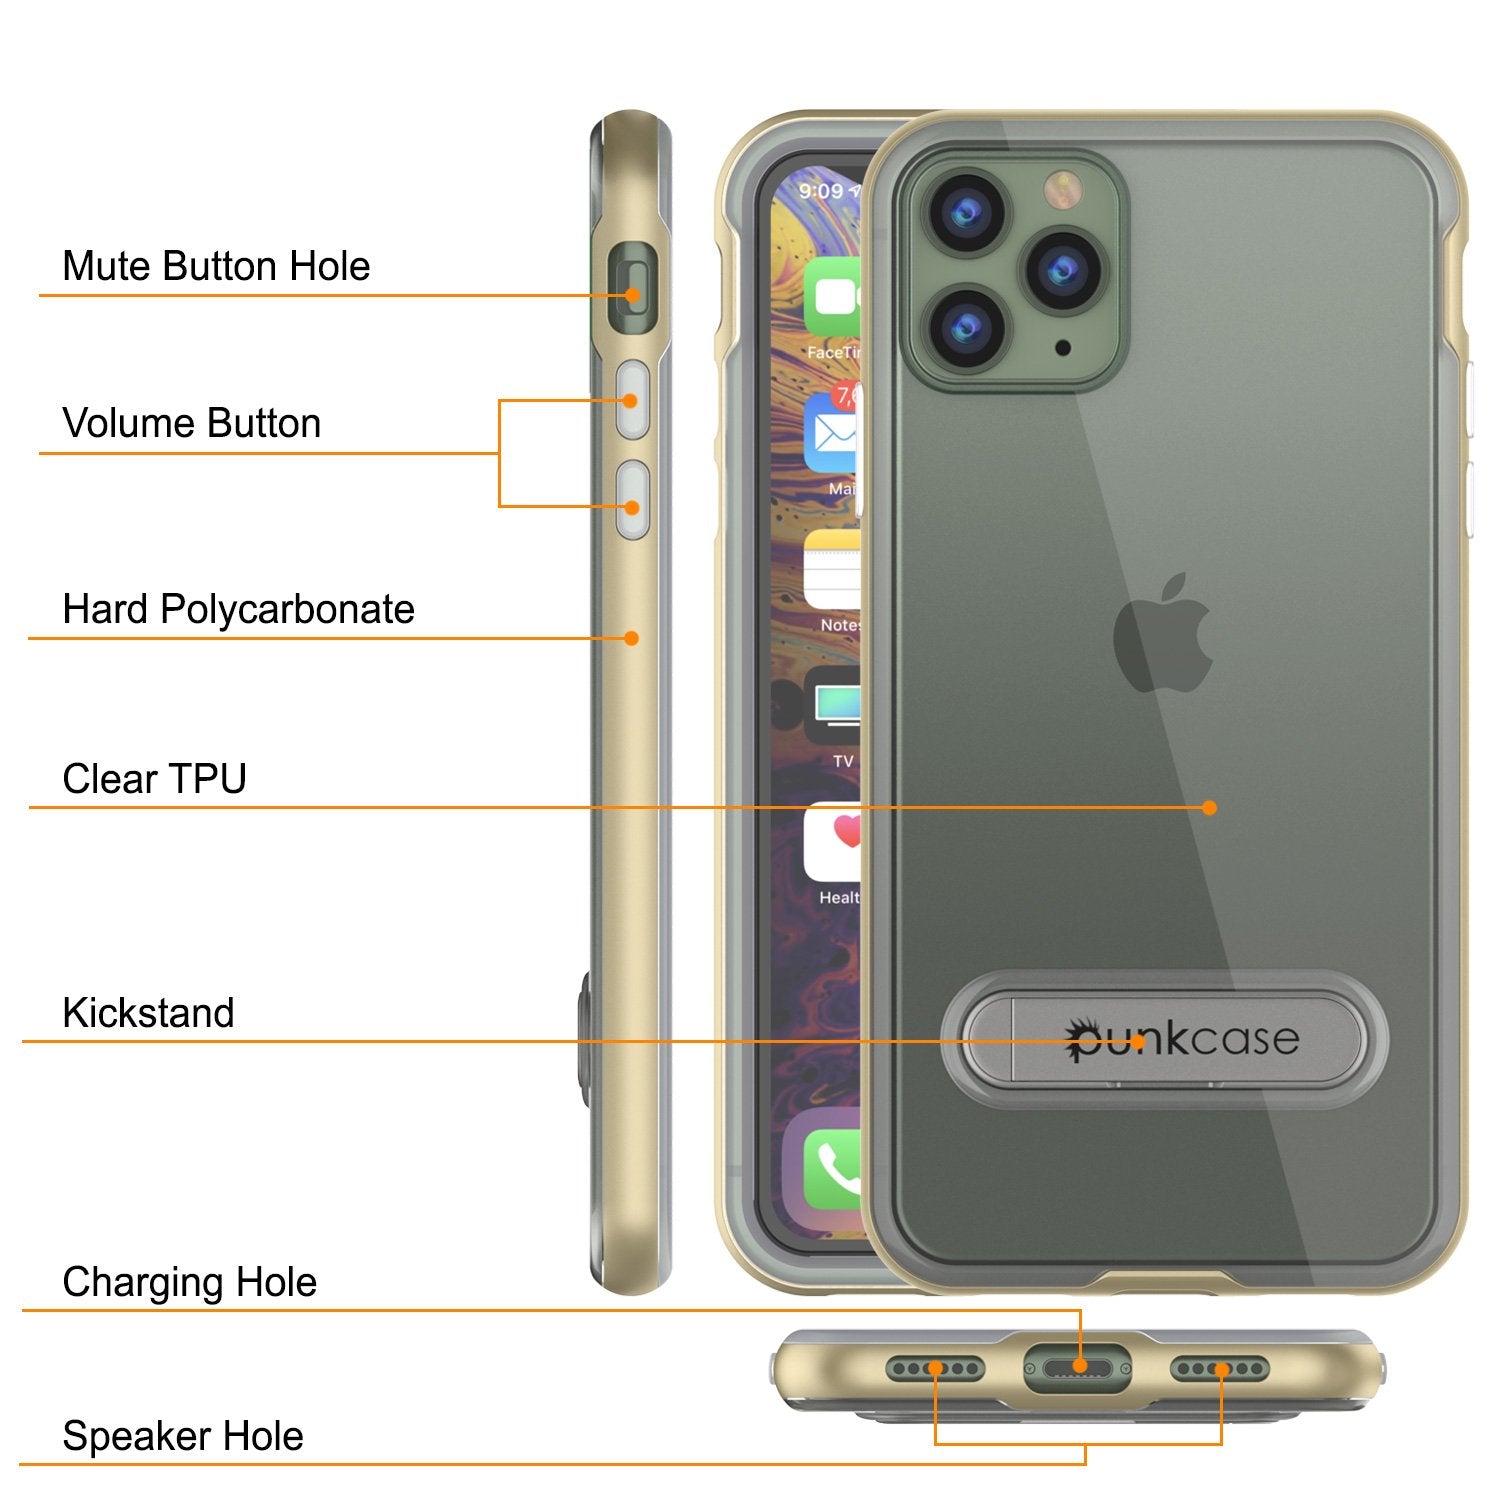 iPhone 11 Pro Case, PUNKcase [LUCID 3.0 Series] [Slim Fit] Armor Cover w/ Integrated Screen Protector [Gold]